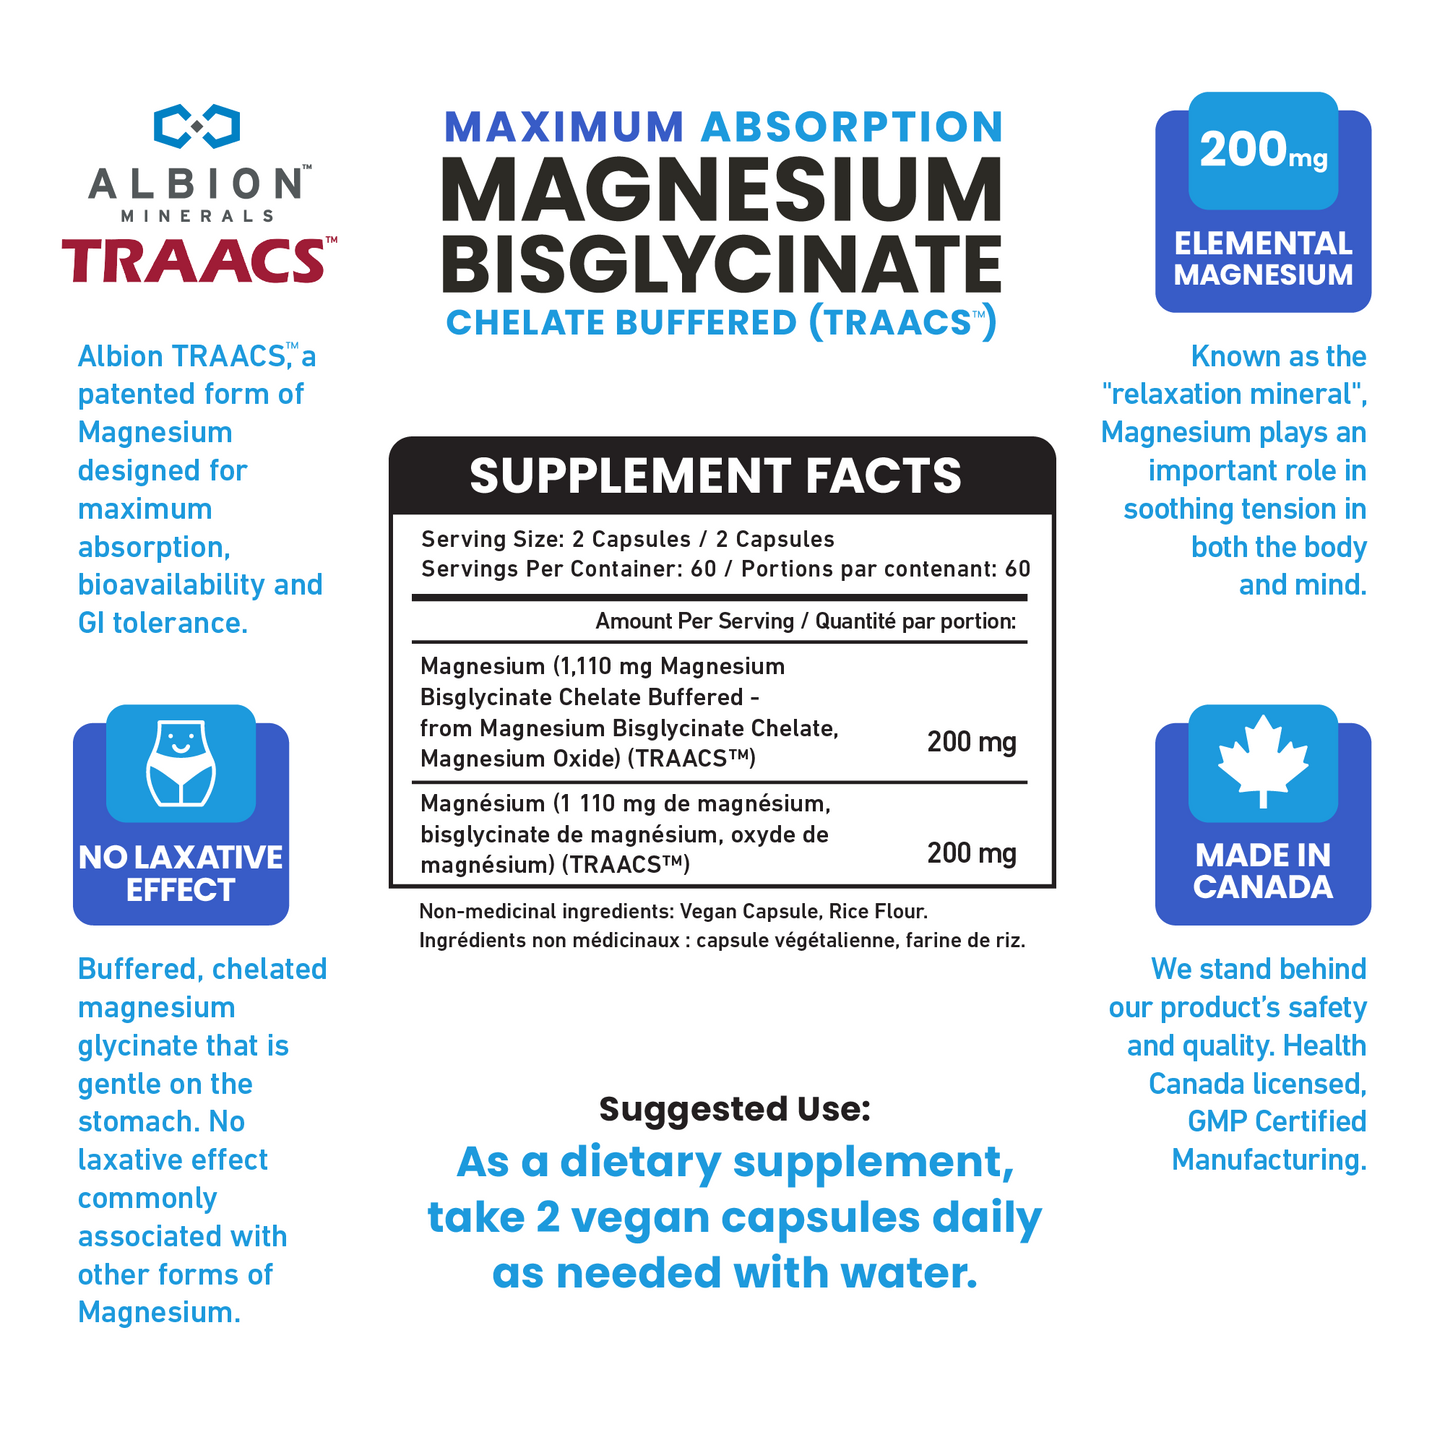 Magnesium Bisglycinate Chelate Buffered (TRAACS™)